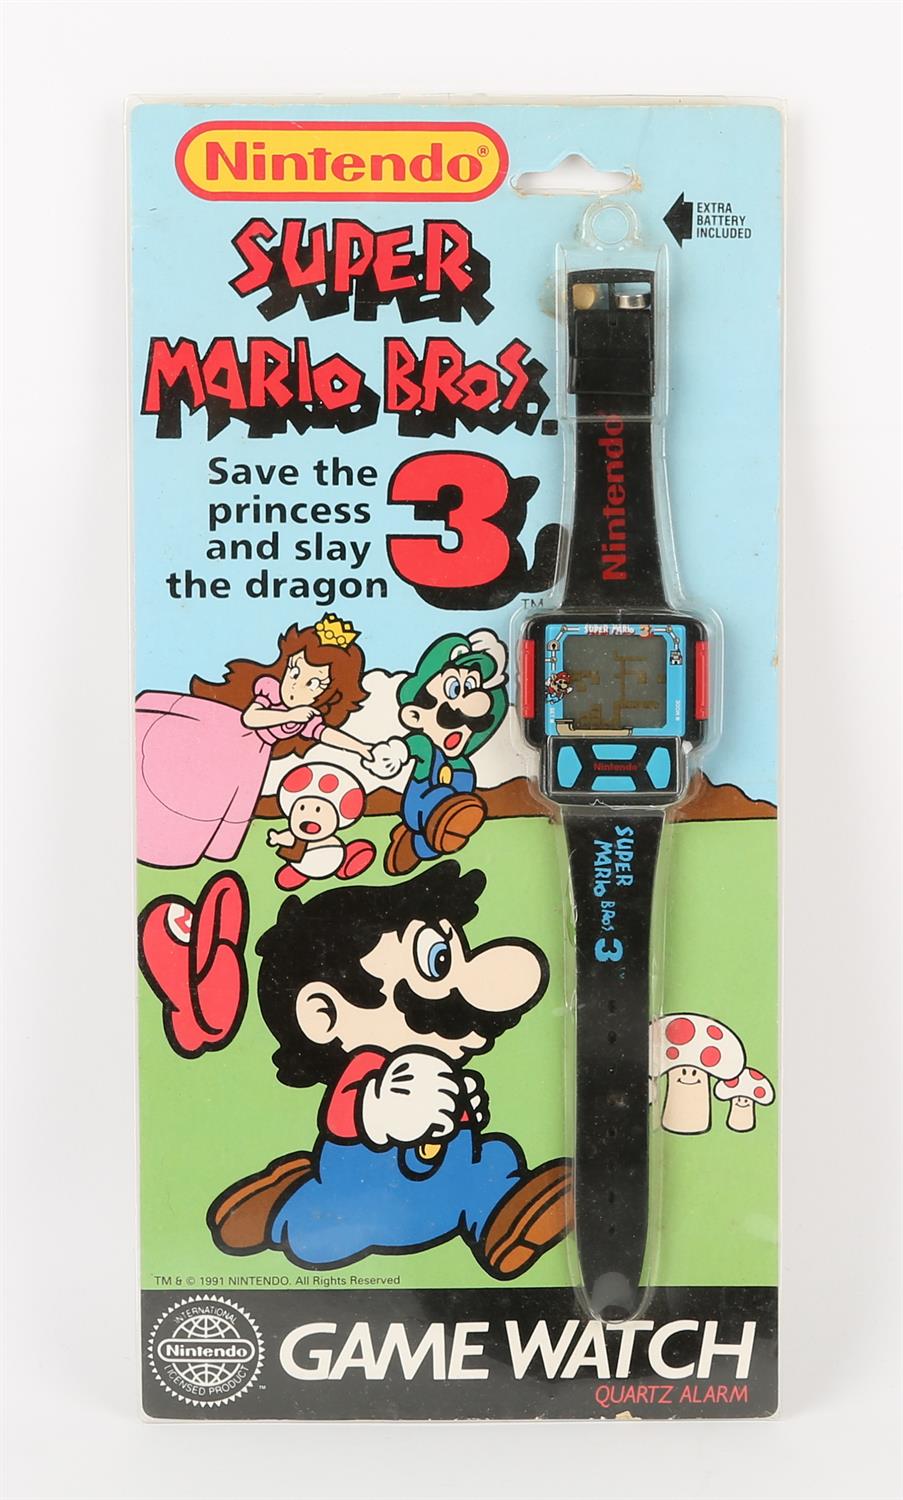 Nintendo Super Mario Bros. 3 Nelsonic Game Watch with extra battery Item is unused,